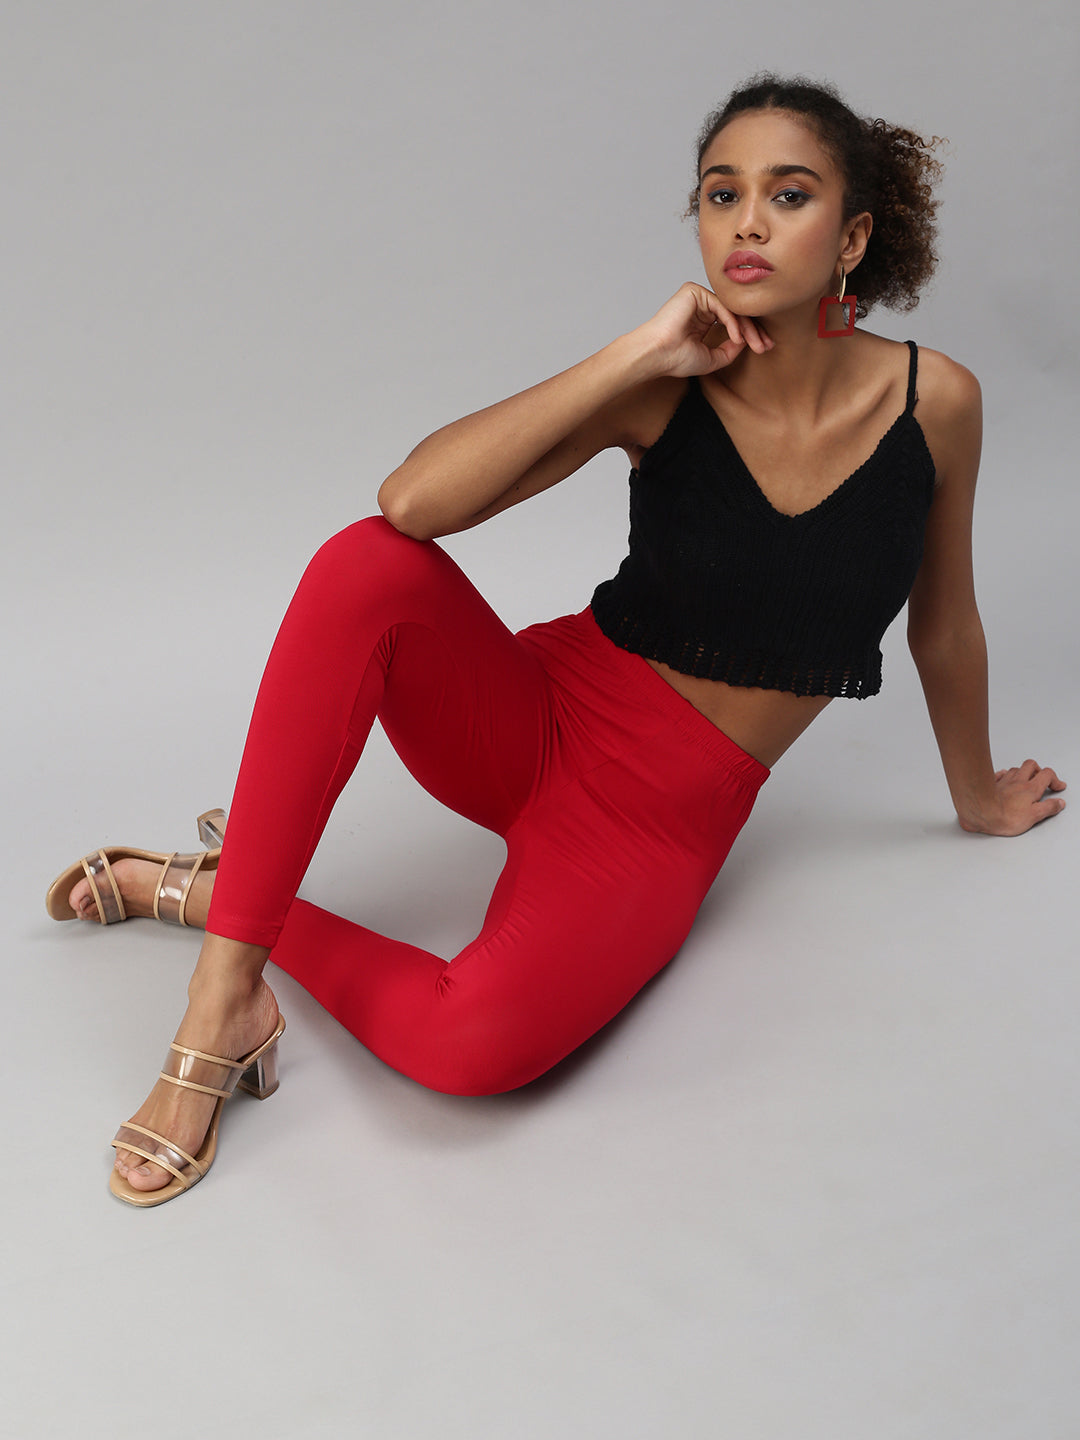 Prisma Ankle Cut Leggings Red - S, Red at Rs 190, Mendonsa Colony, Dindigul